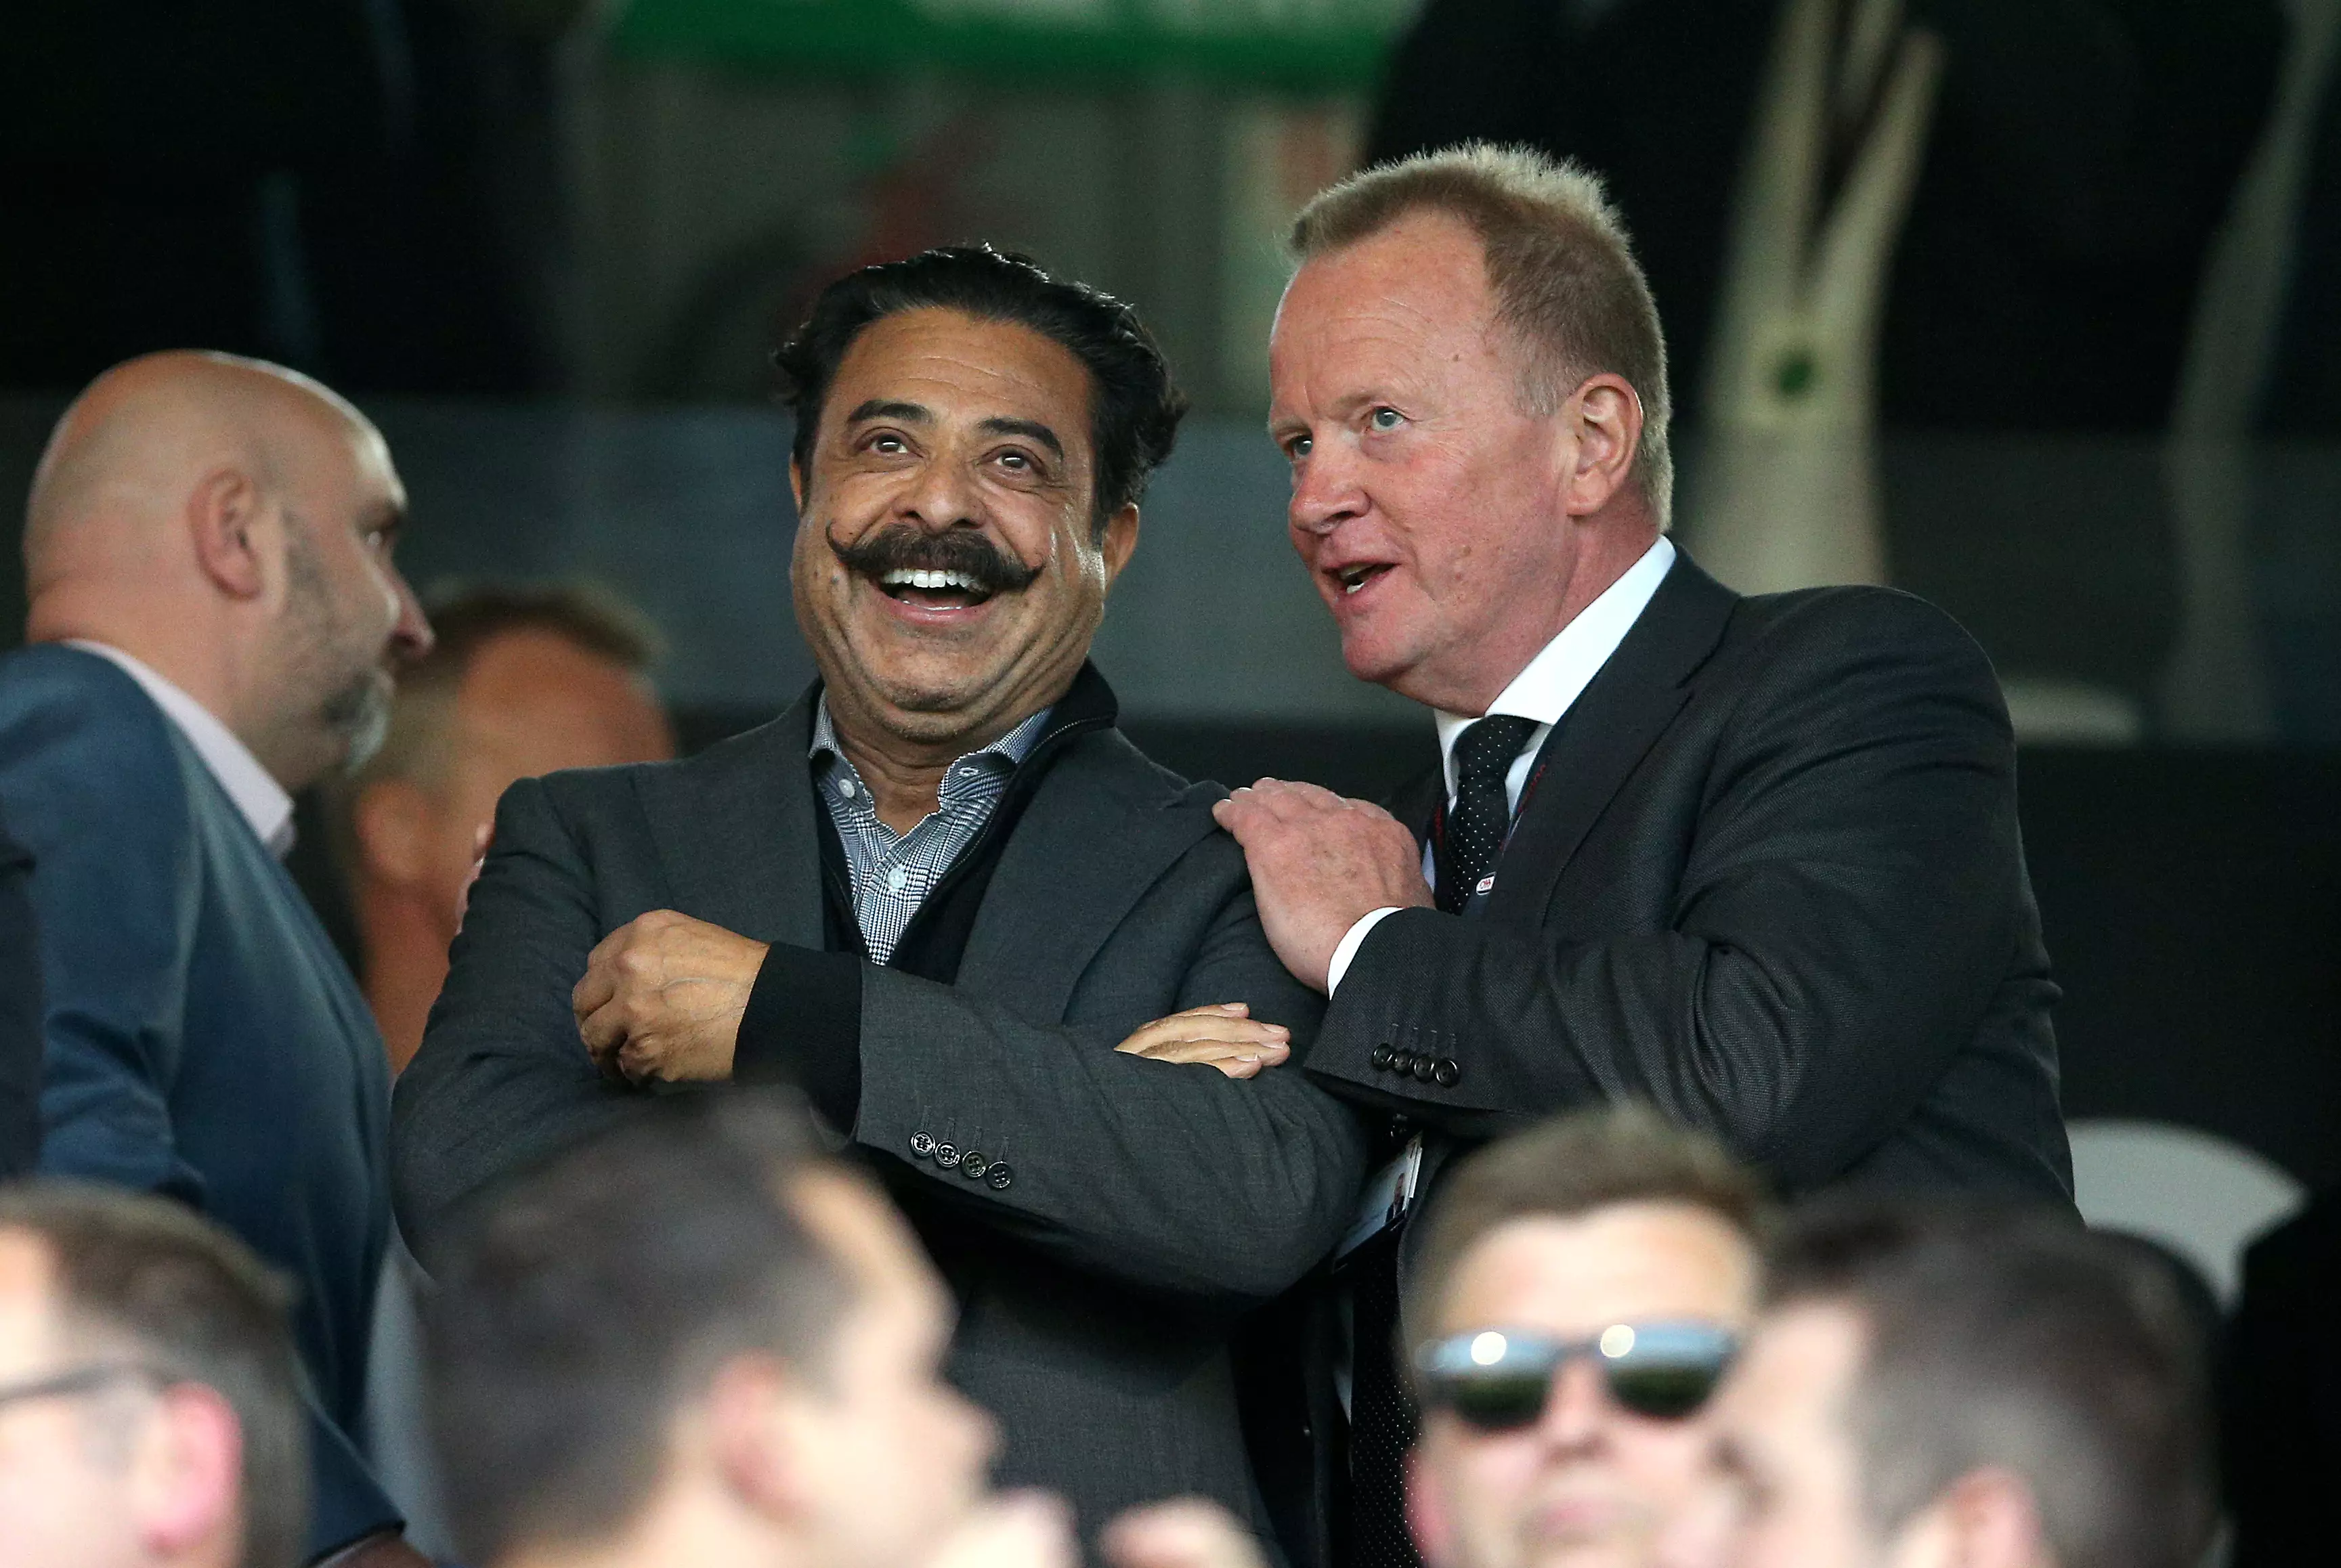 Fulham's owner also owns the Jacksonville Jaguars. Image: PA Images